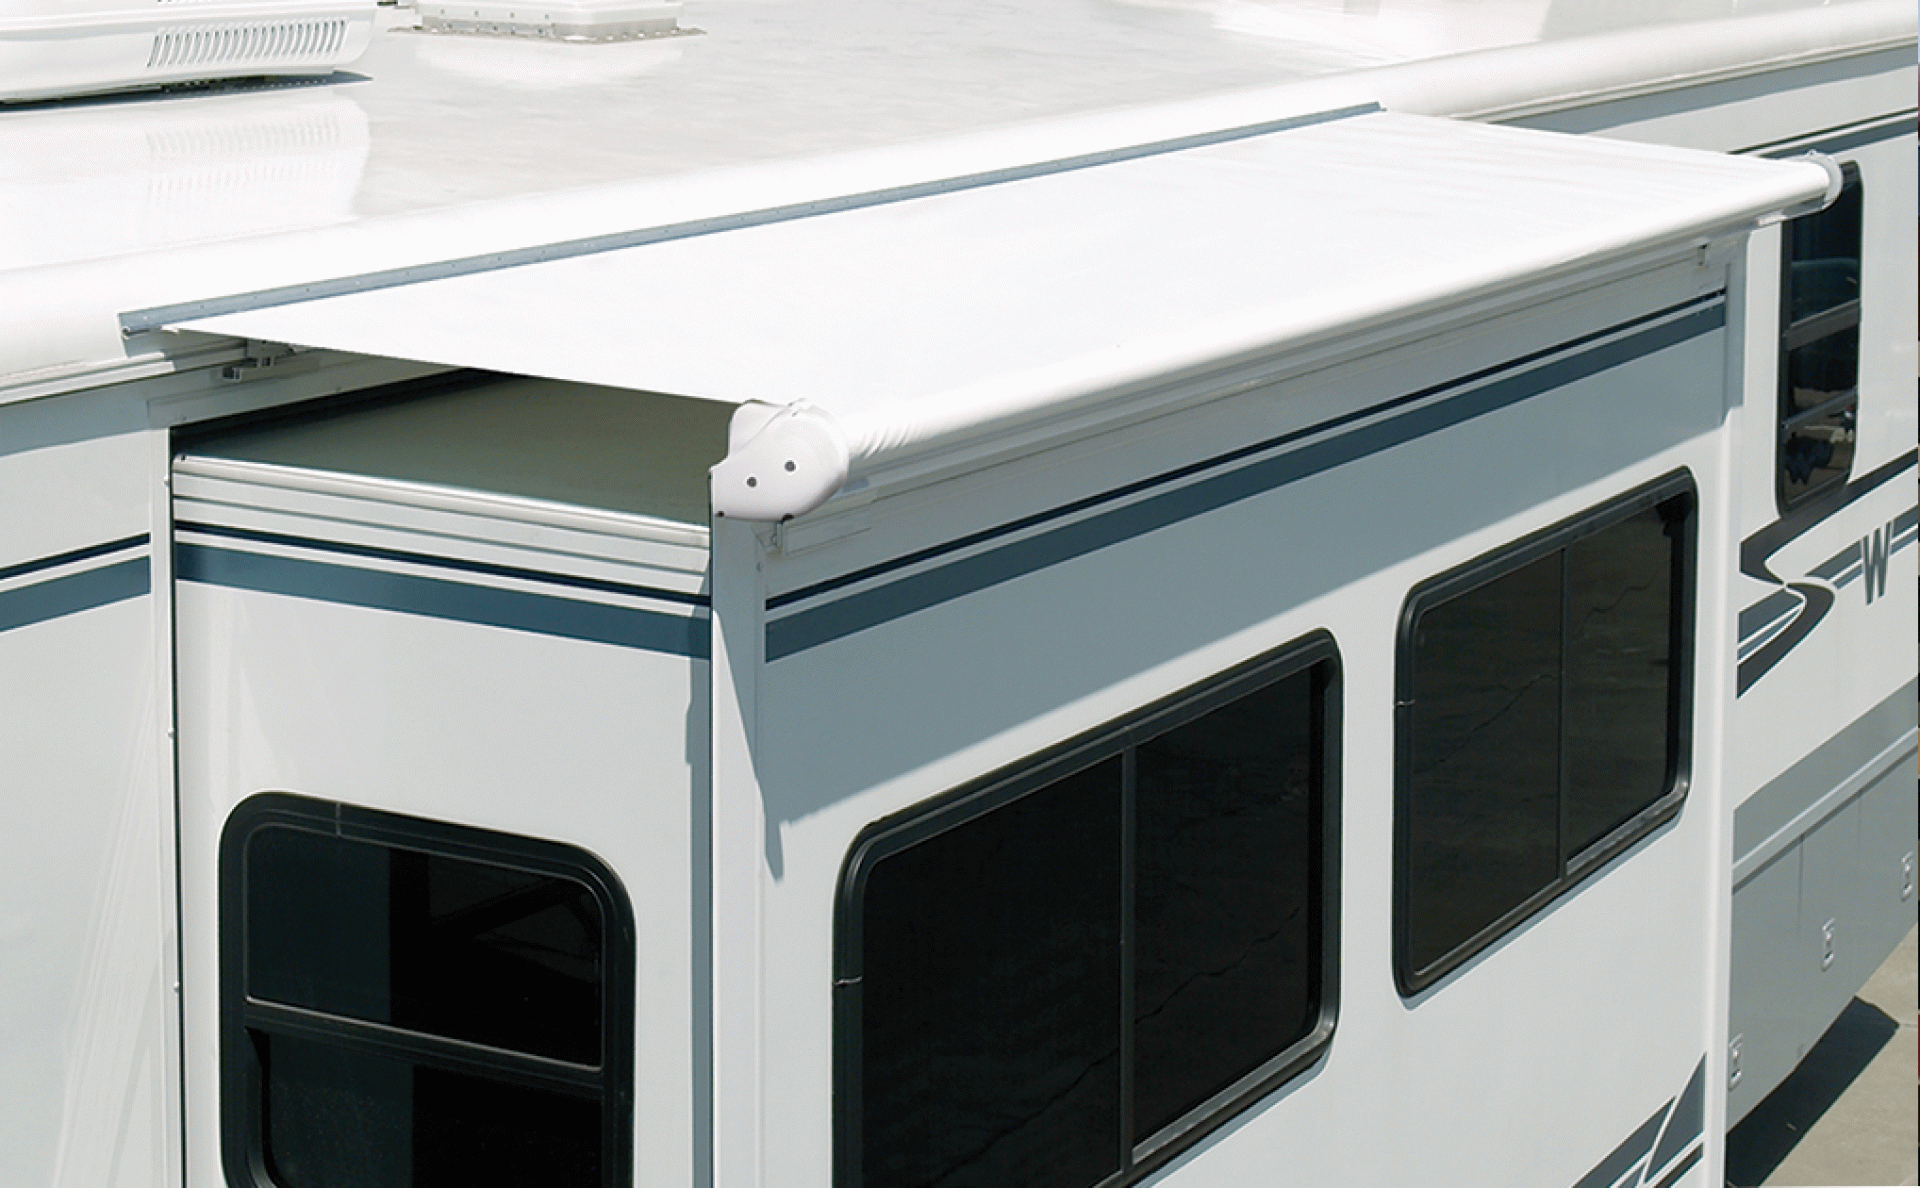 CAREFREE OF COLORADO | UQ1650025 | SIDEOUT KOVER III AWNING 158" - 165" ROOF RANGE WHITE VINYL FABRIC & DEFLECTOR